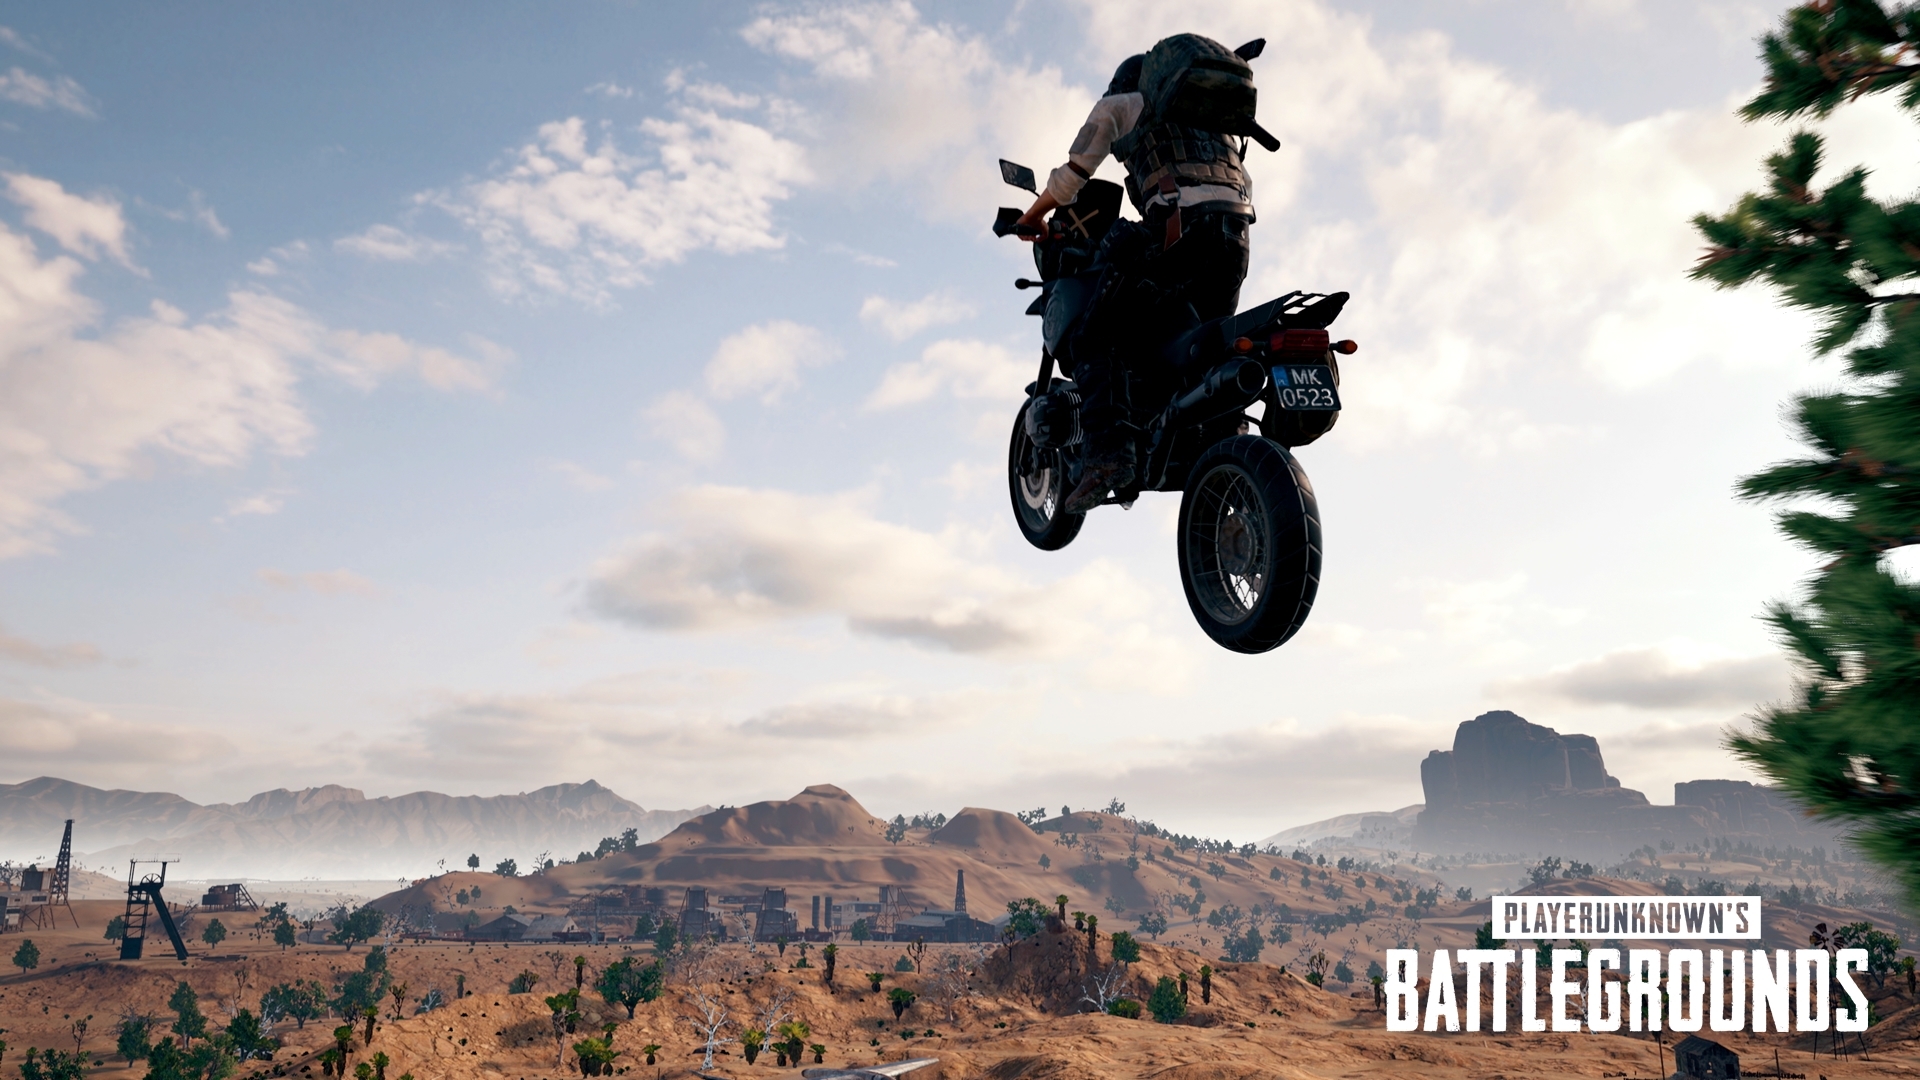 player unknown battlegrounds pc pdates